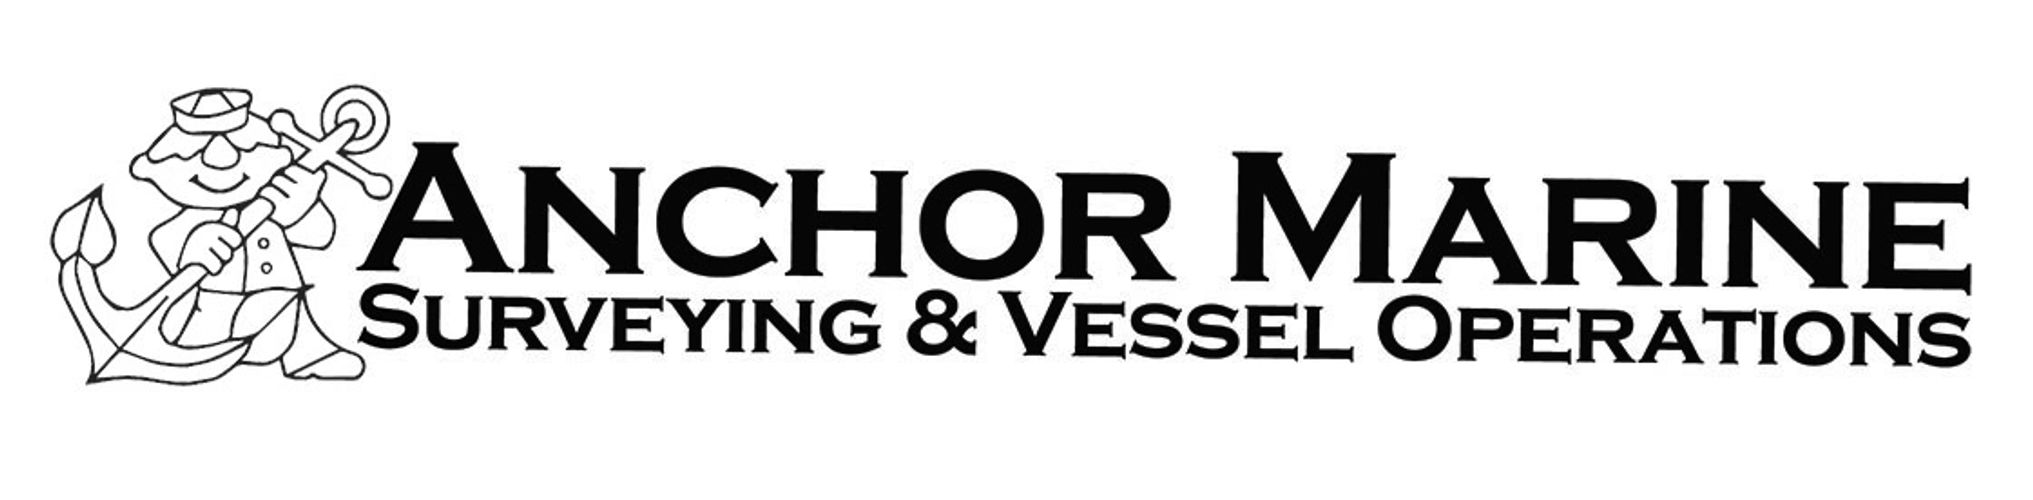 Anchor Marine Surveying and Vessel Operations